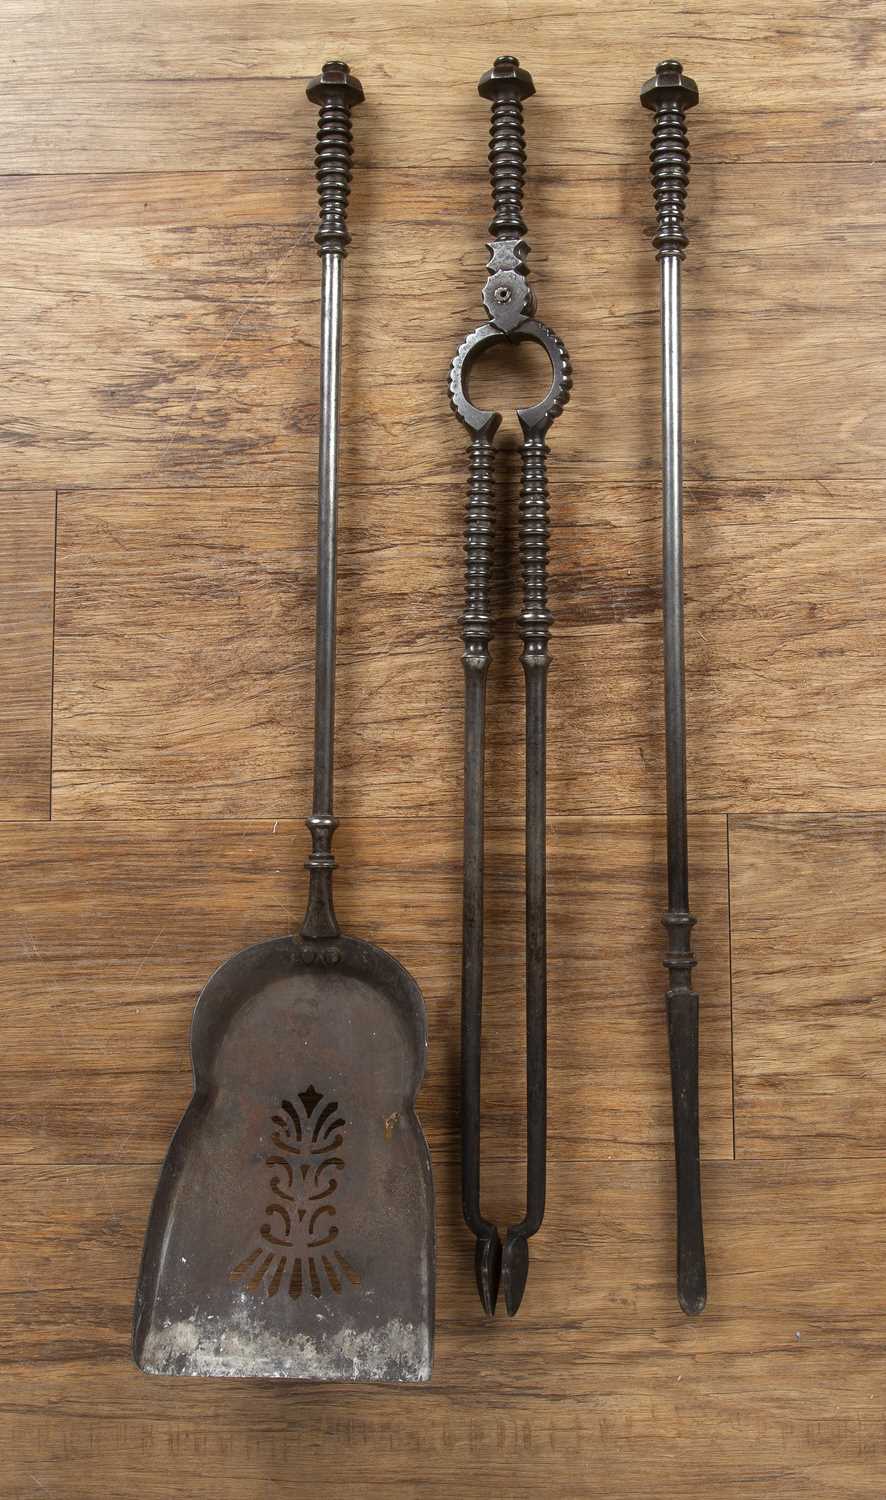 Cotswold School set of steel fire irons, comprising of a shovel, poker and tongs, longest is 78cm